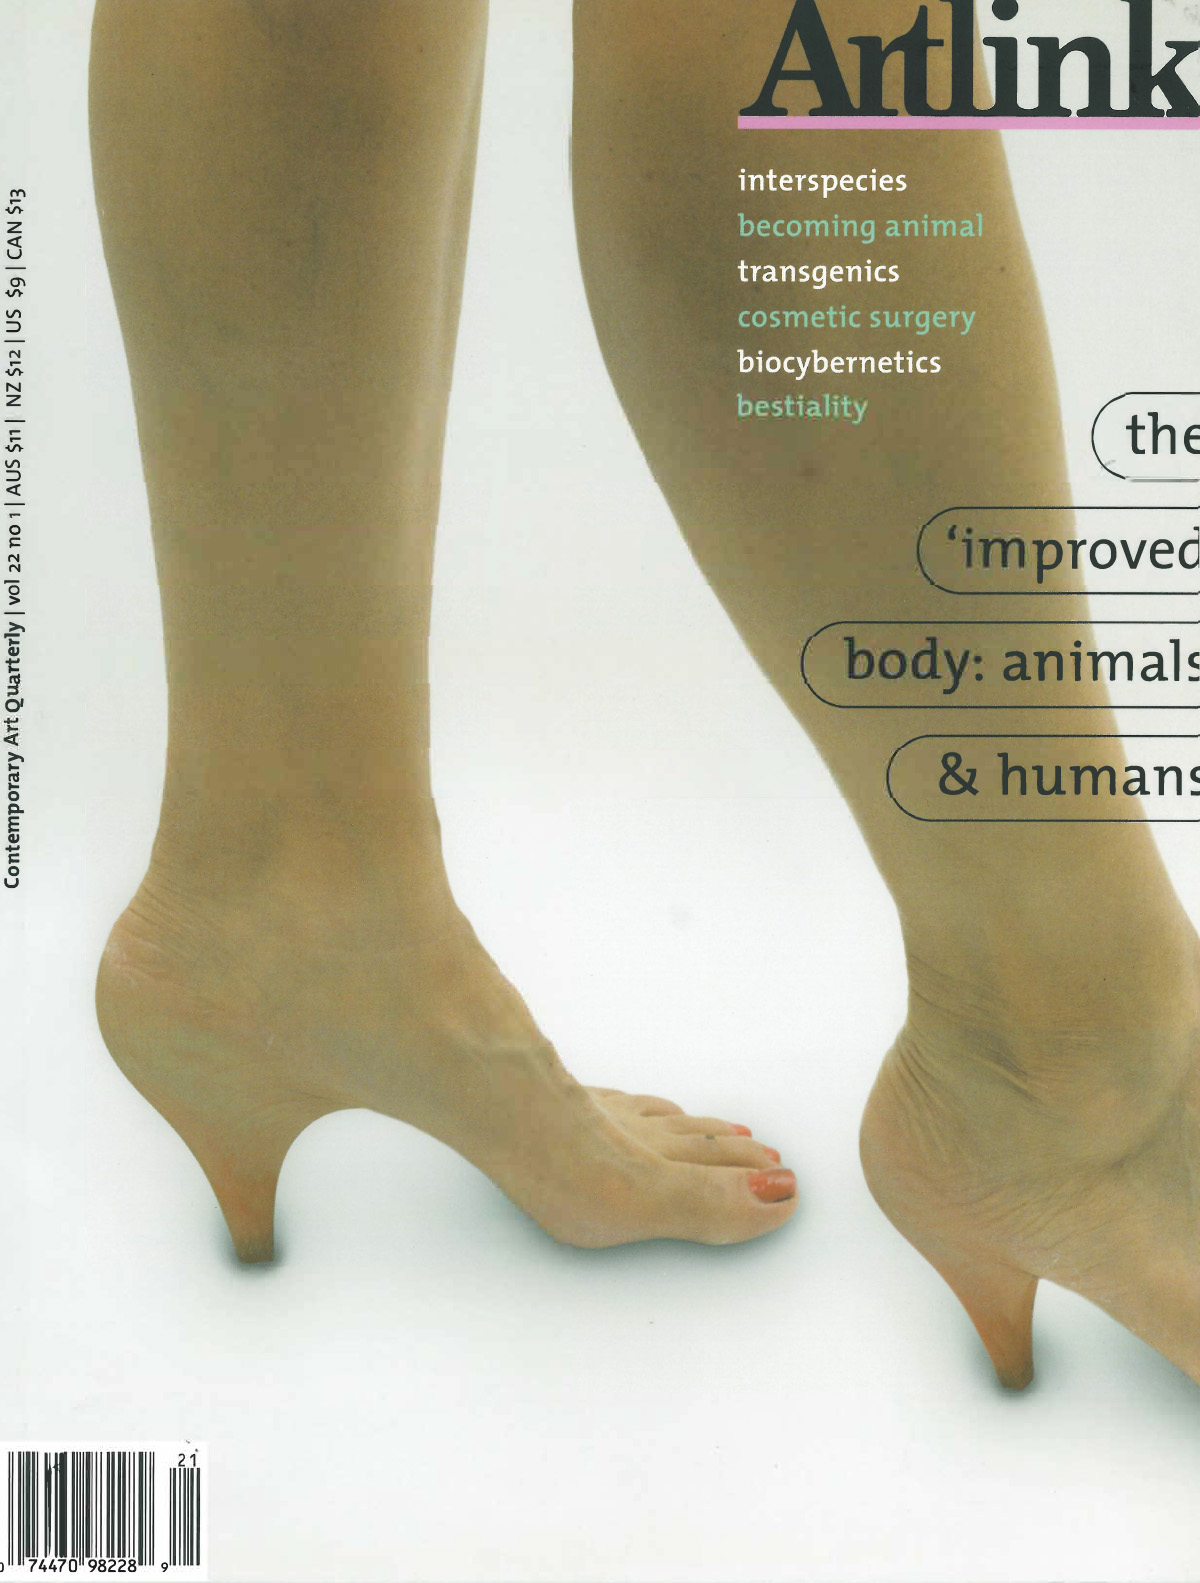 Issue 22:1 | March 2002 | The Improved Body